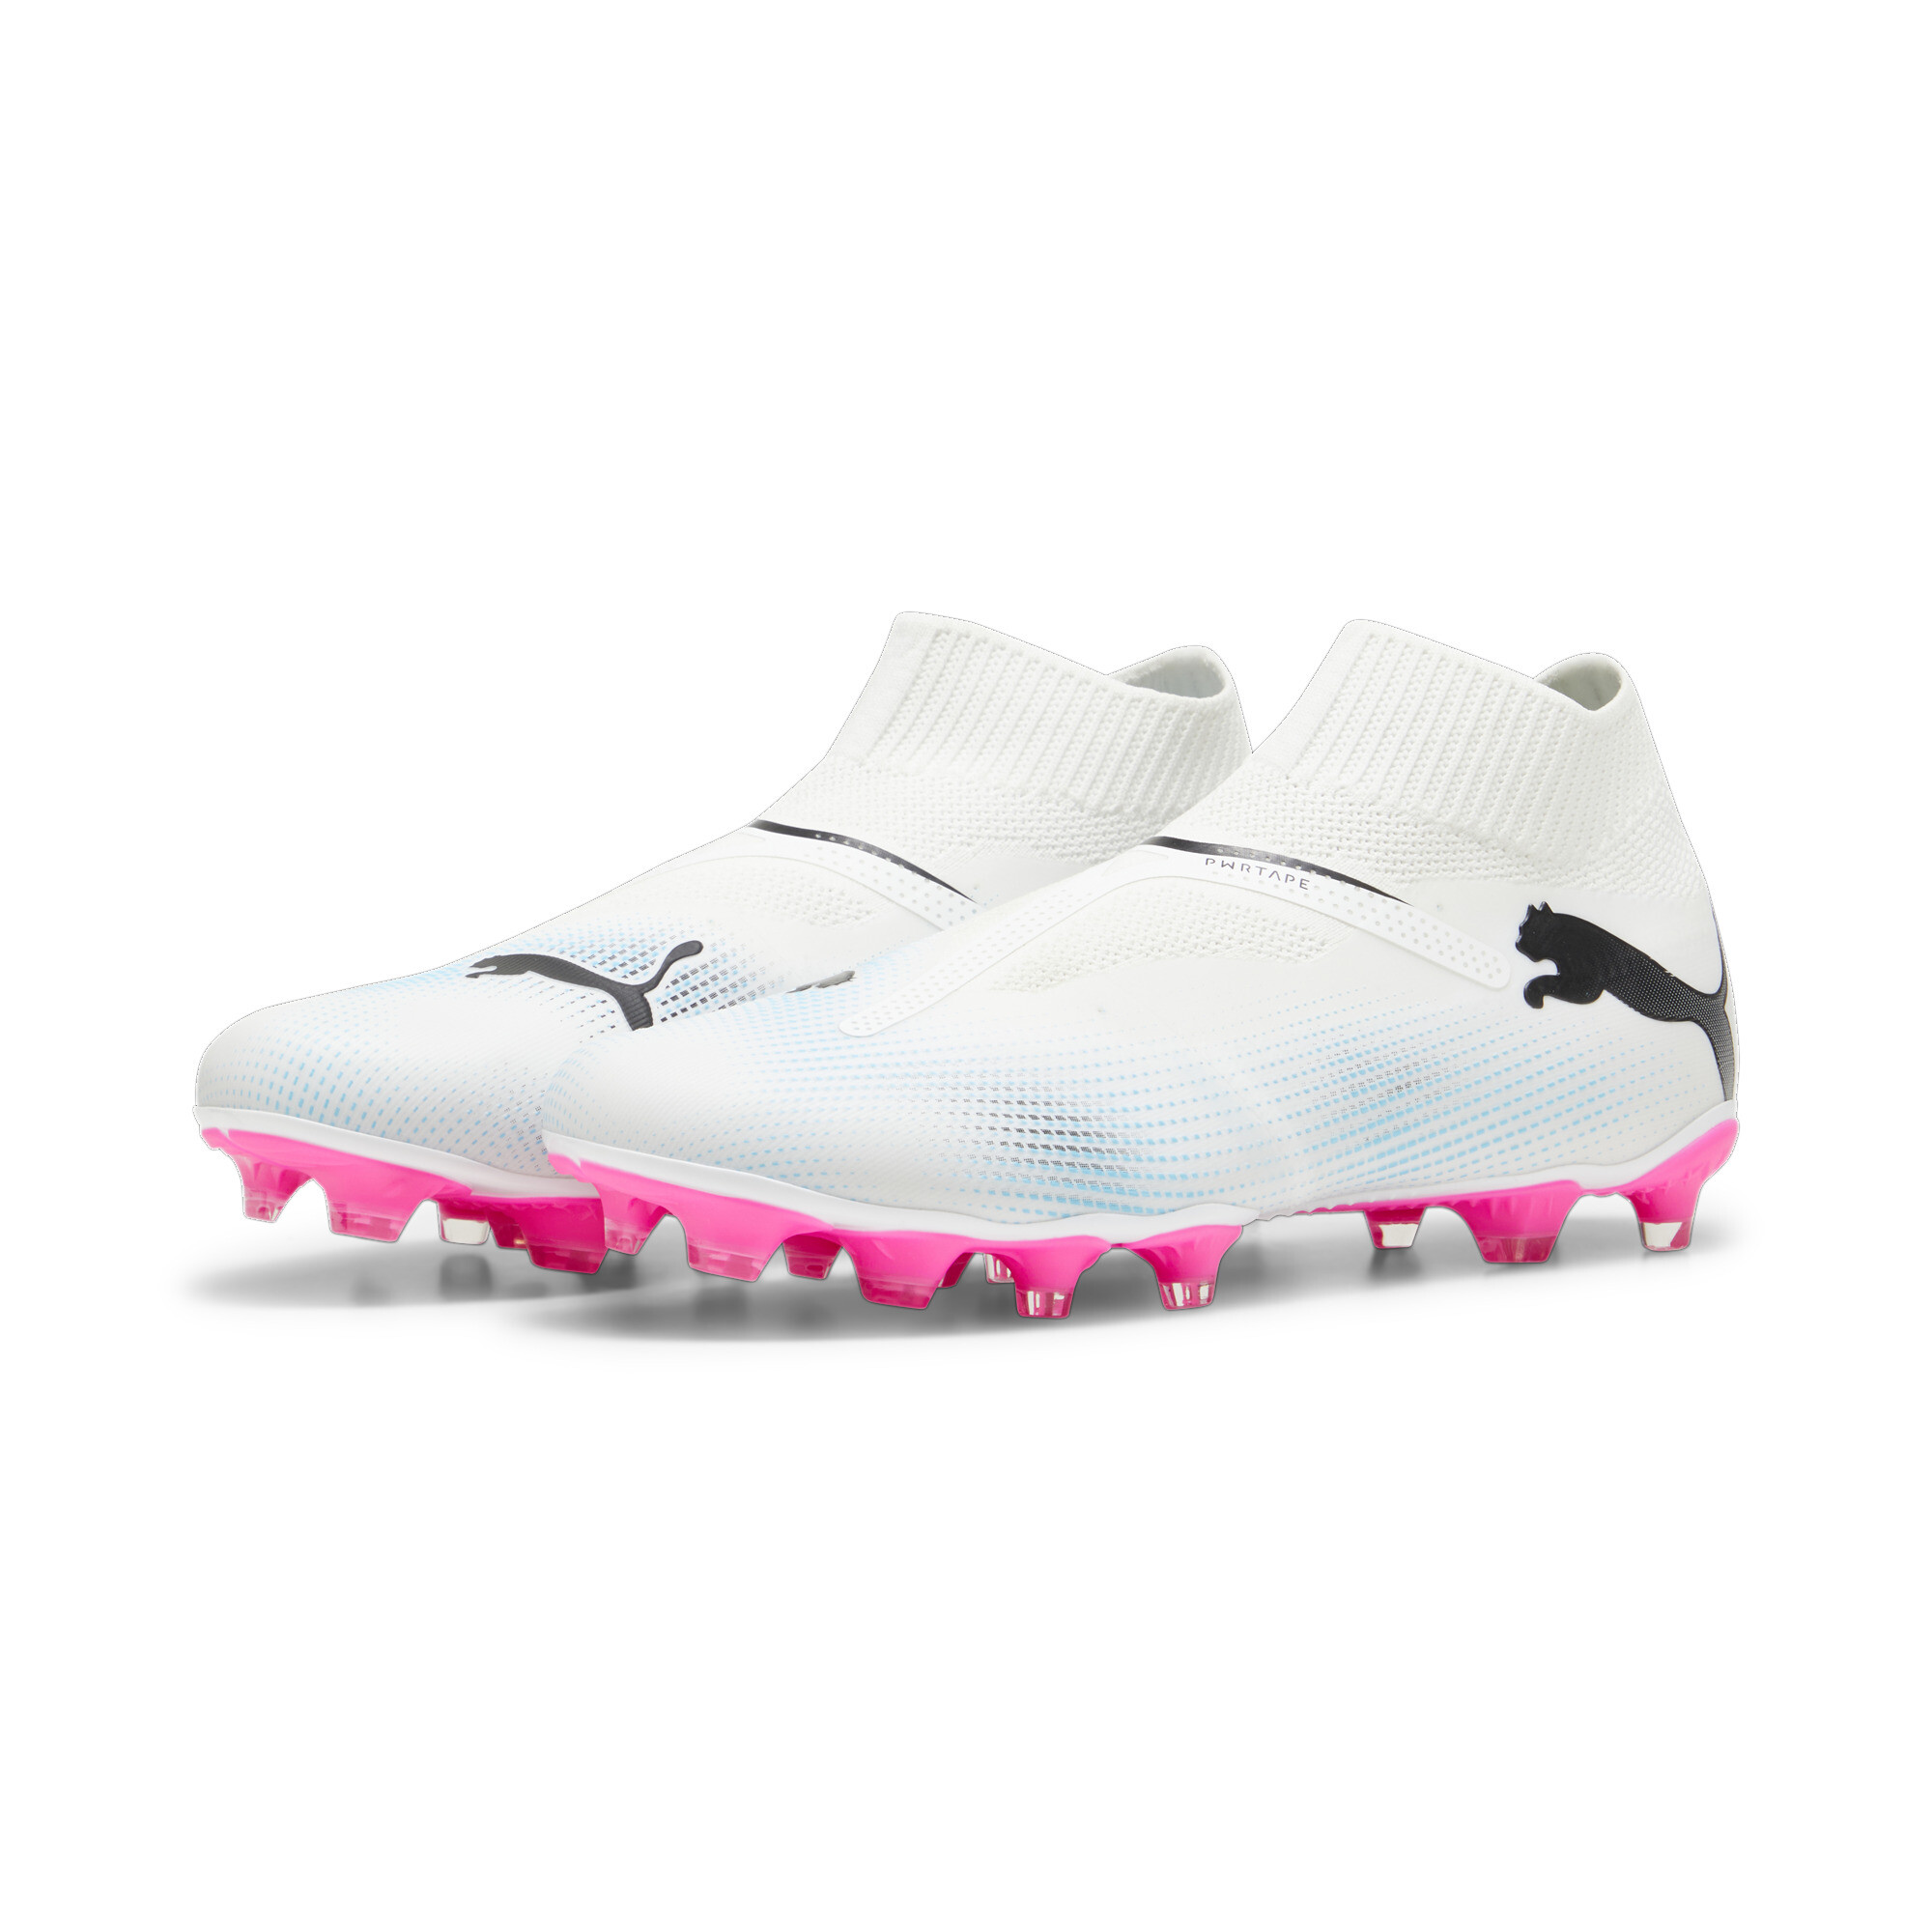 Men's PUMA FUTURE 7 MATCH FG/AG Laceless Football Boots In White/Pink, Size EU 42.5